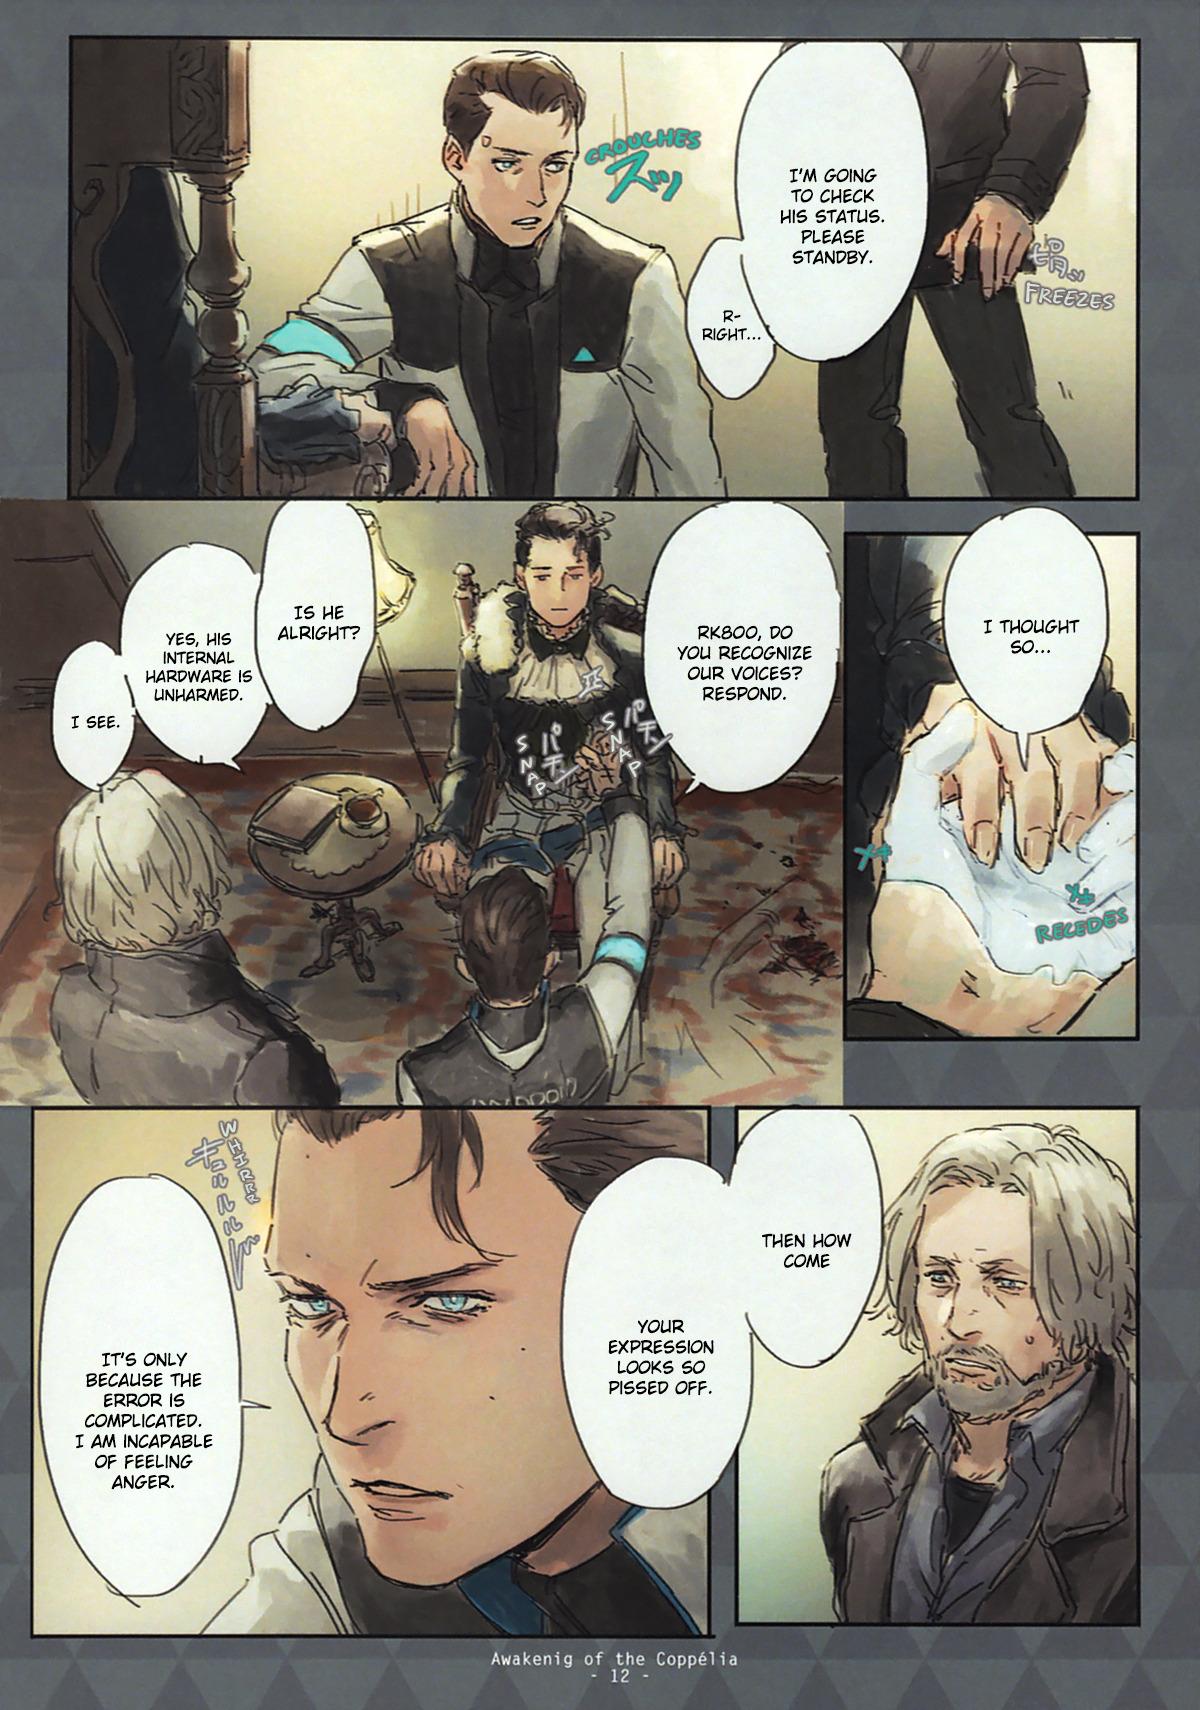 Blow Job Contest Awakening of Copper - Detroit become human Shower - Page 8